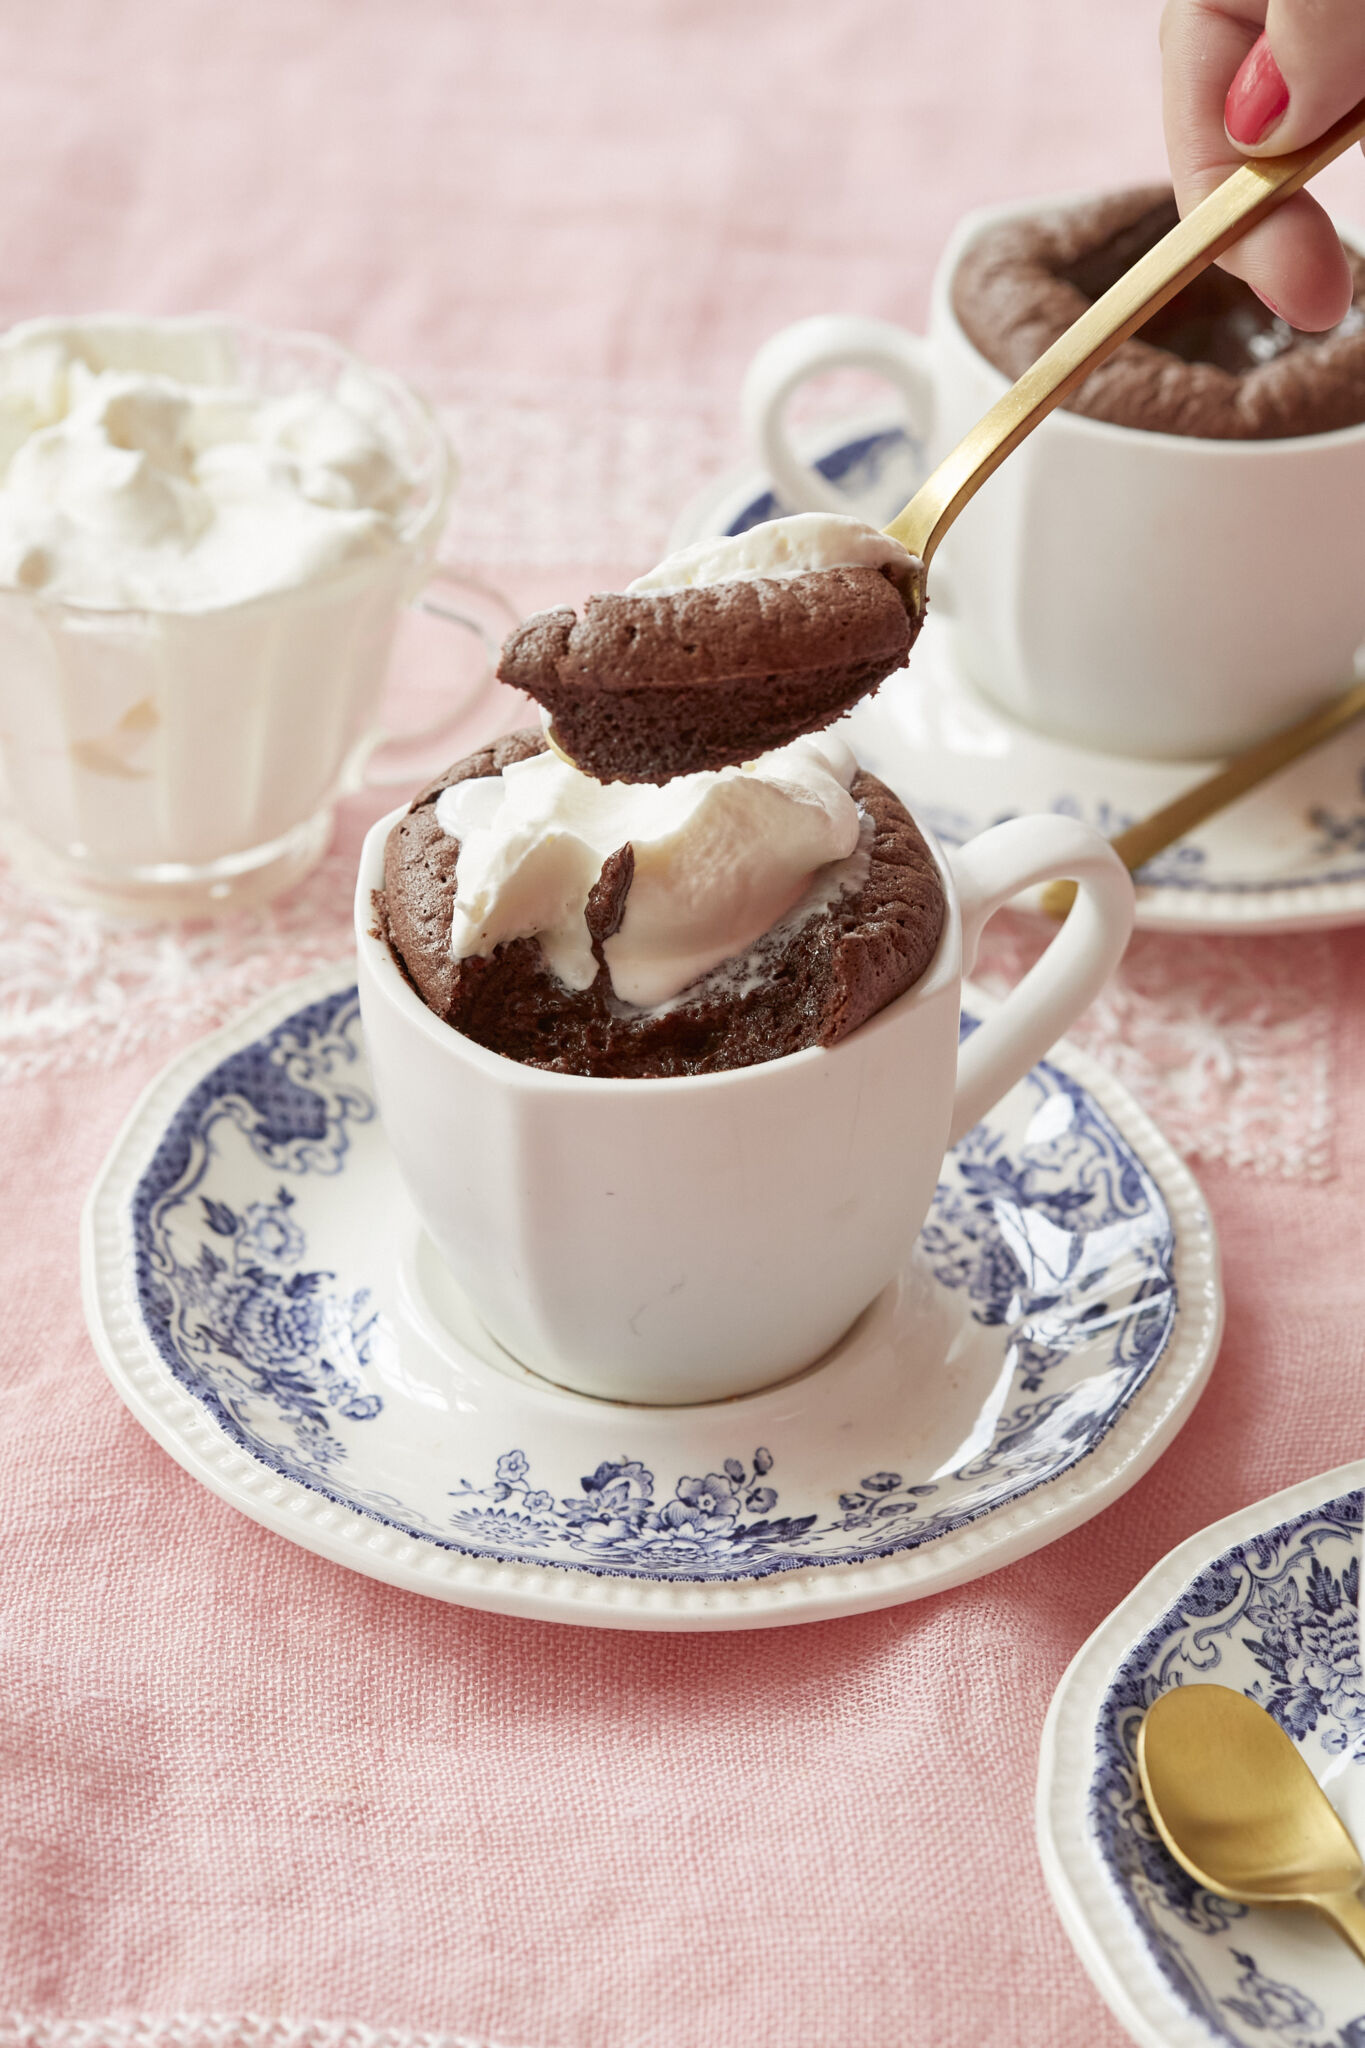 Baked hot chocolate is served in two white mugs on blue floral saucers with golden spoons. A glass cup of whipped cream is on the side. It's both light and rich, with an addictive contrast between the melty center and the surrounding soufflé-like cake. One mug of the baked hot chocolate is topped with softly whipped cream. One spoonful of scooped baked chocolate shows the moist interior. 